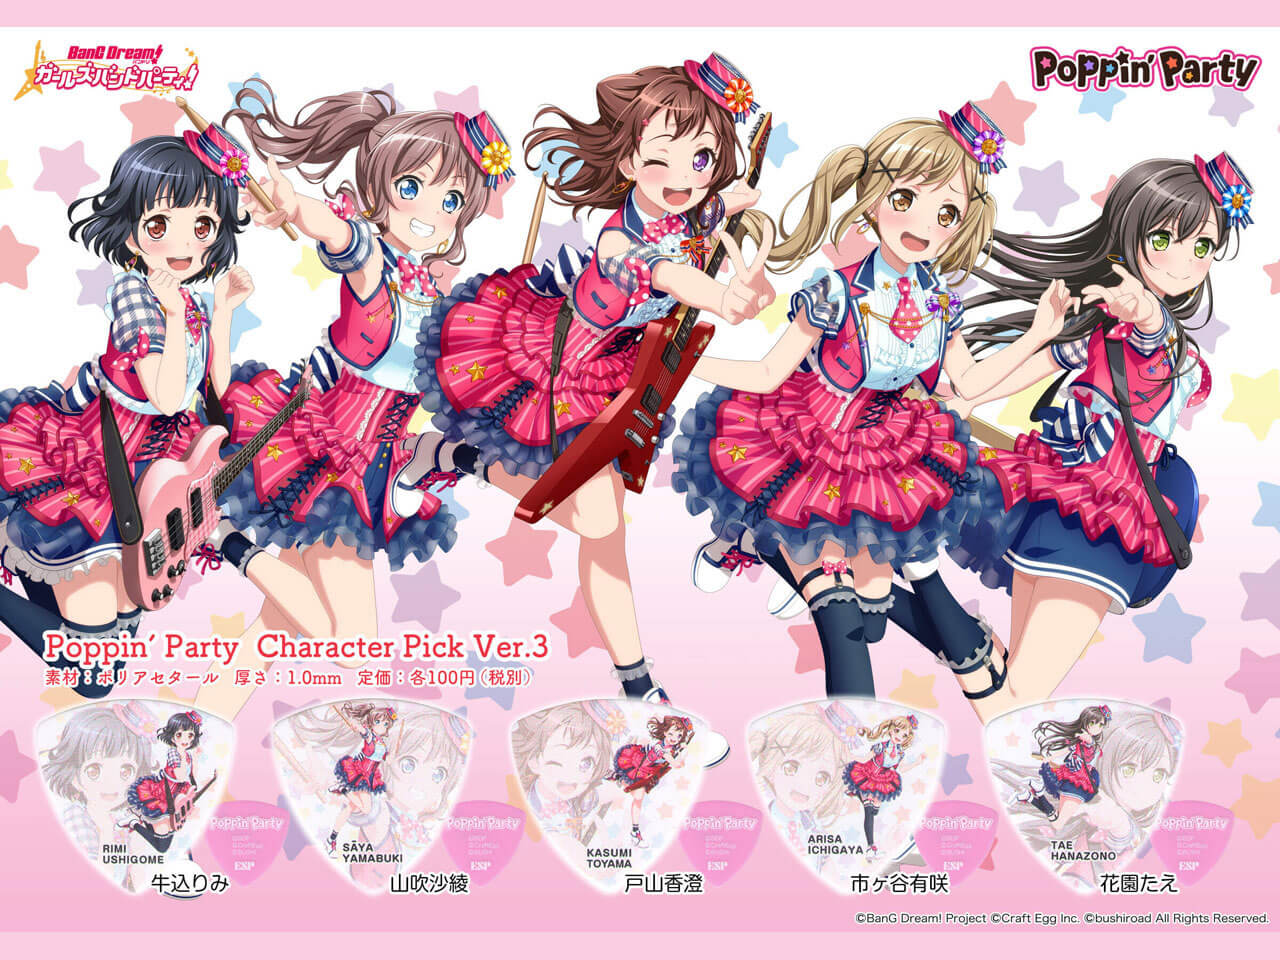 【ESP×BanG Dream!コラボピック】Poppin’Party Character Pick Ver.3 "市ヶ谷有咲"10枚セット（GBP Arisa Poppin Party 3）